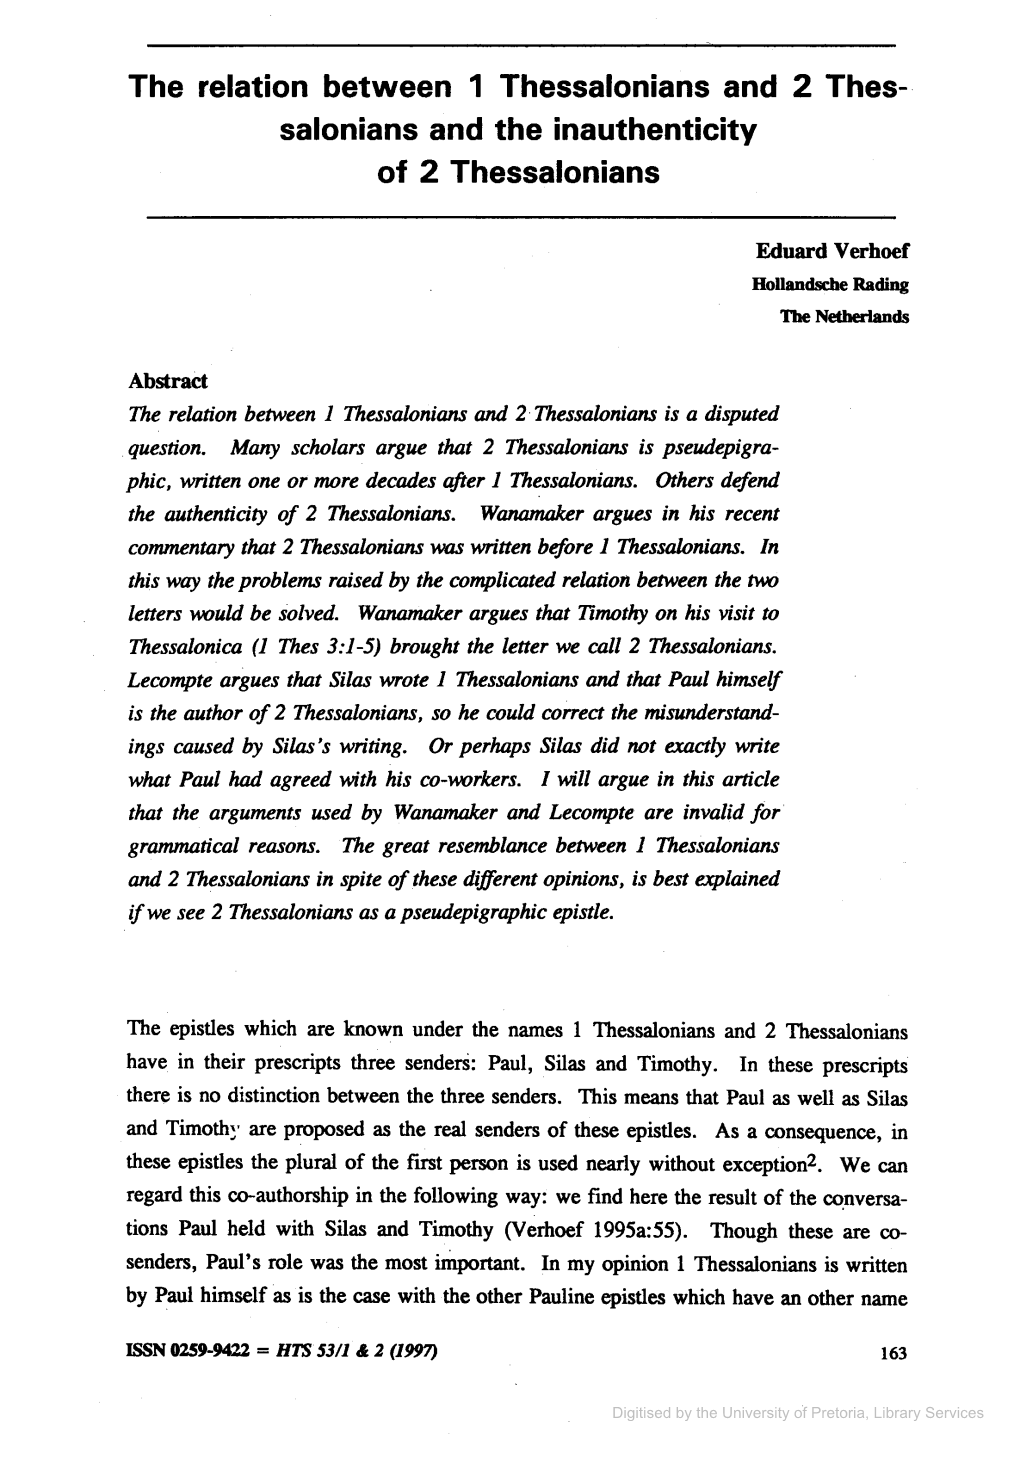 The Relation Between 1 Thessalonians and 2 Thes- Salonians and The